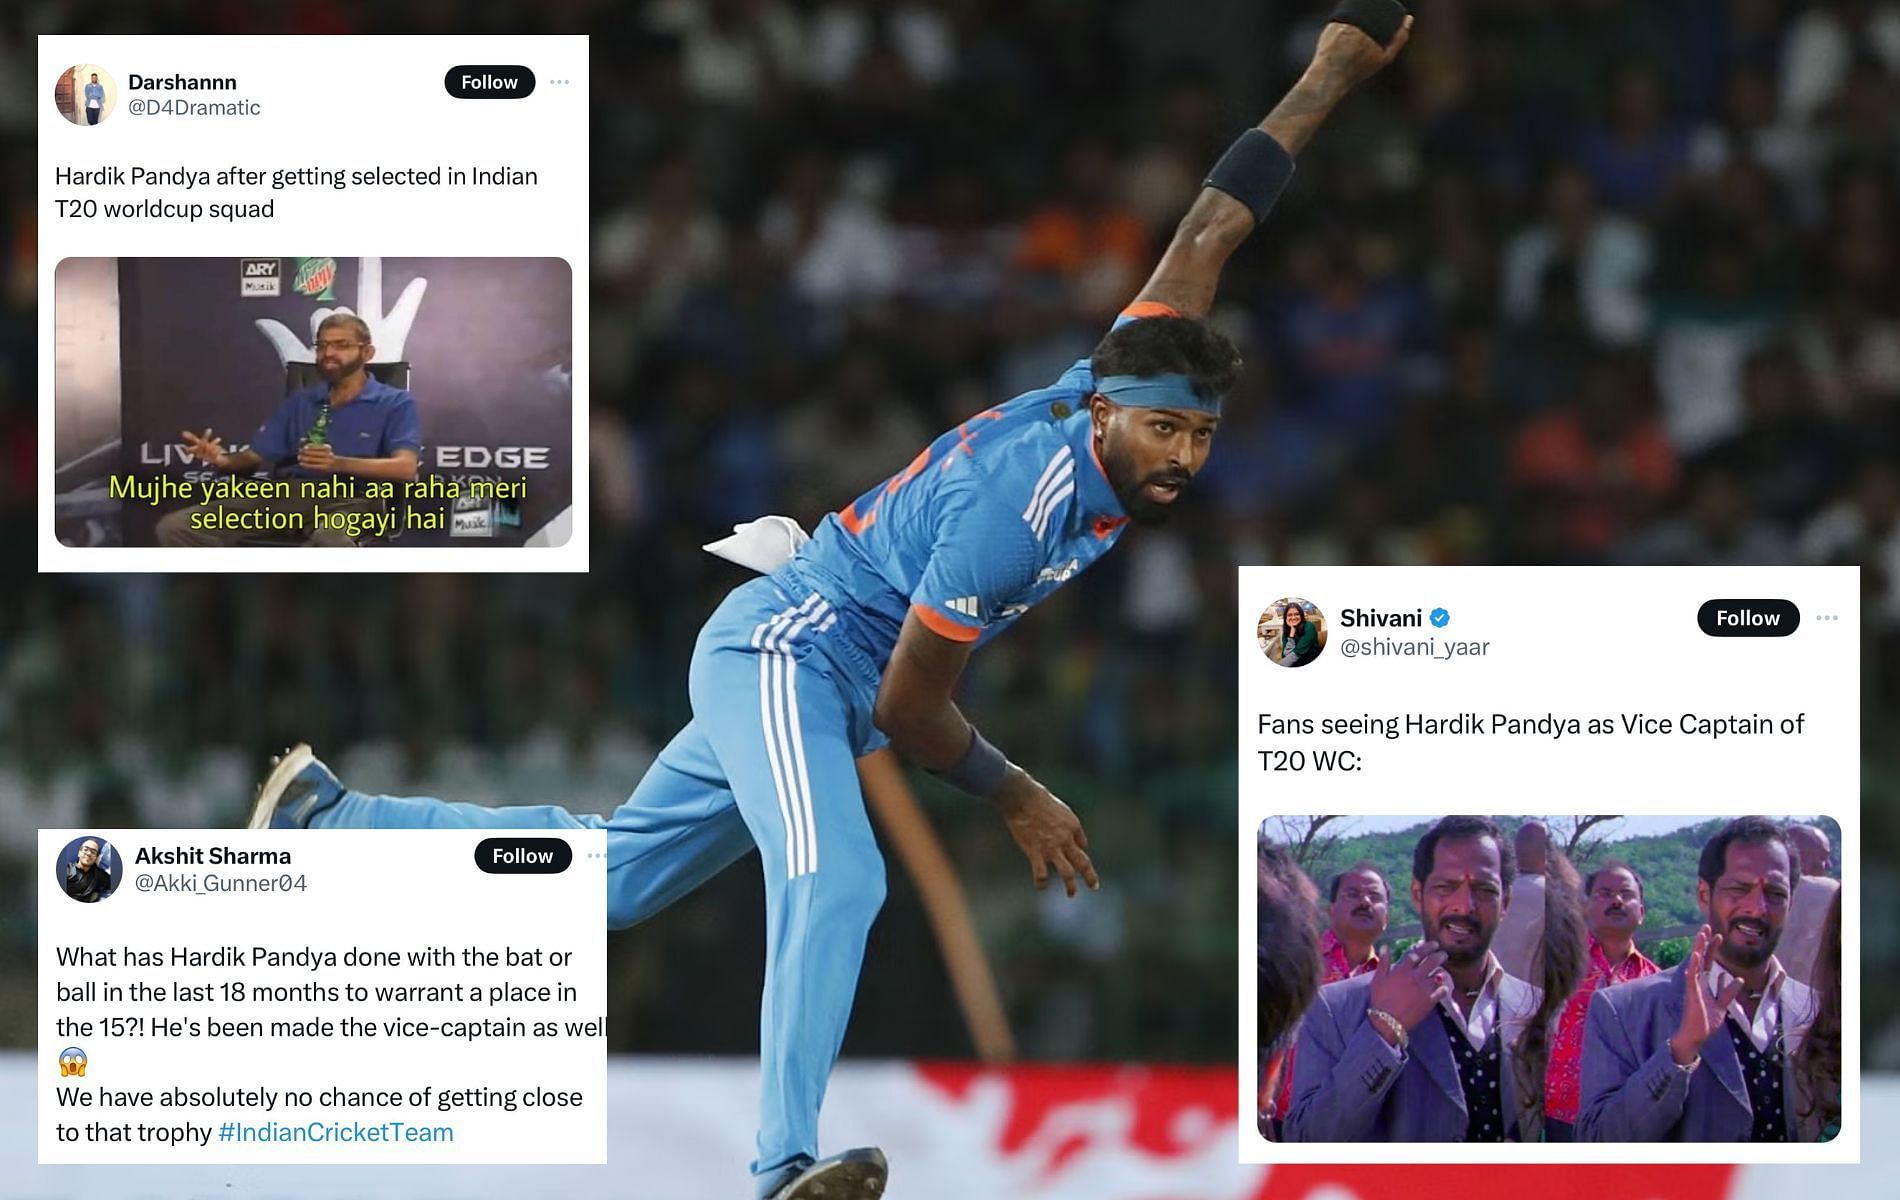 Several fans were unhappy with Hardik Pandya getting India